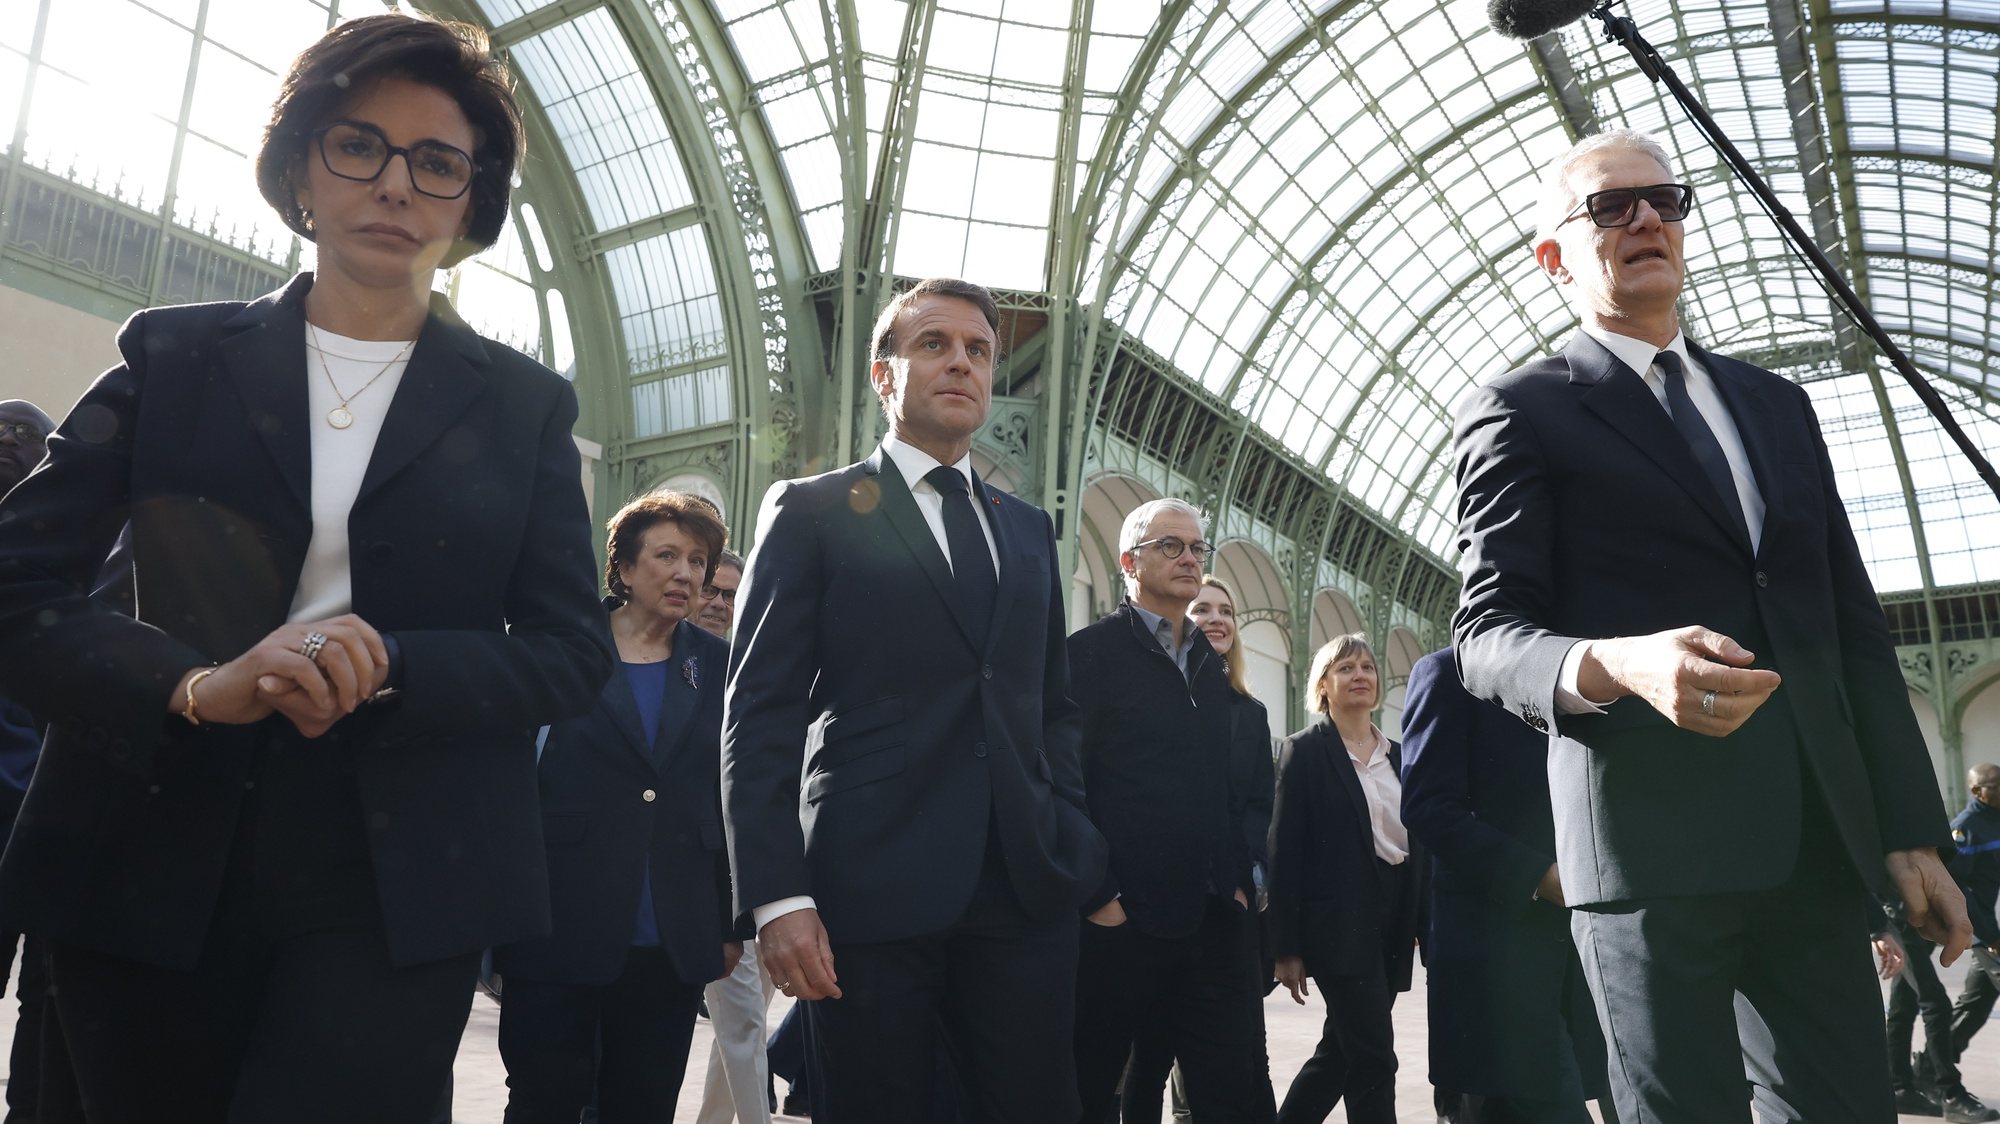 epa11279435 French President Emmanuel Macron (C) walks next to President of the Grand Palais Didier Fusillier (R) and  Minister of Culture of France Rachida Dati (L) during his visit at the Grand Palais 100 days ahead of the Paris 2024 Olympic Games in Paris, France, 15 April 2024. The 2024 Summer Olympics are held in Paris from 26 July to 11 August 2024, and the Grand Palais will host Fencing and Taekwondo.  EPA/YOAN VALAT / POOL